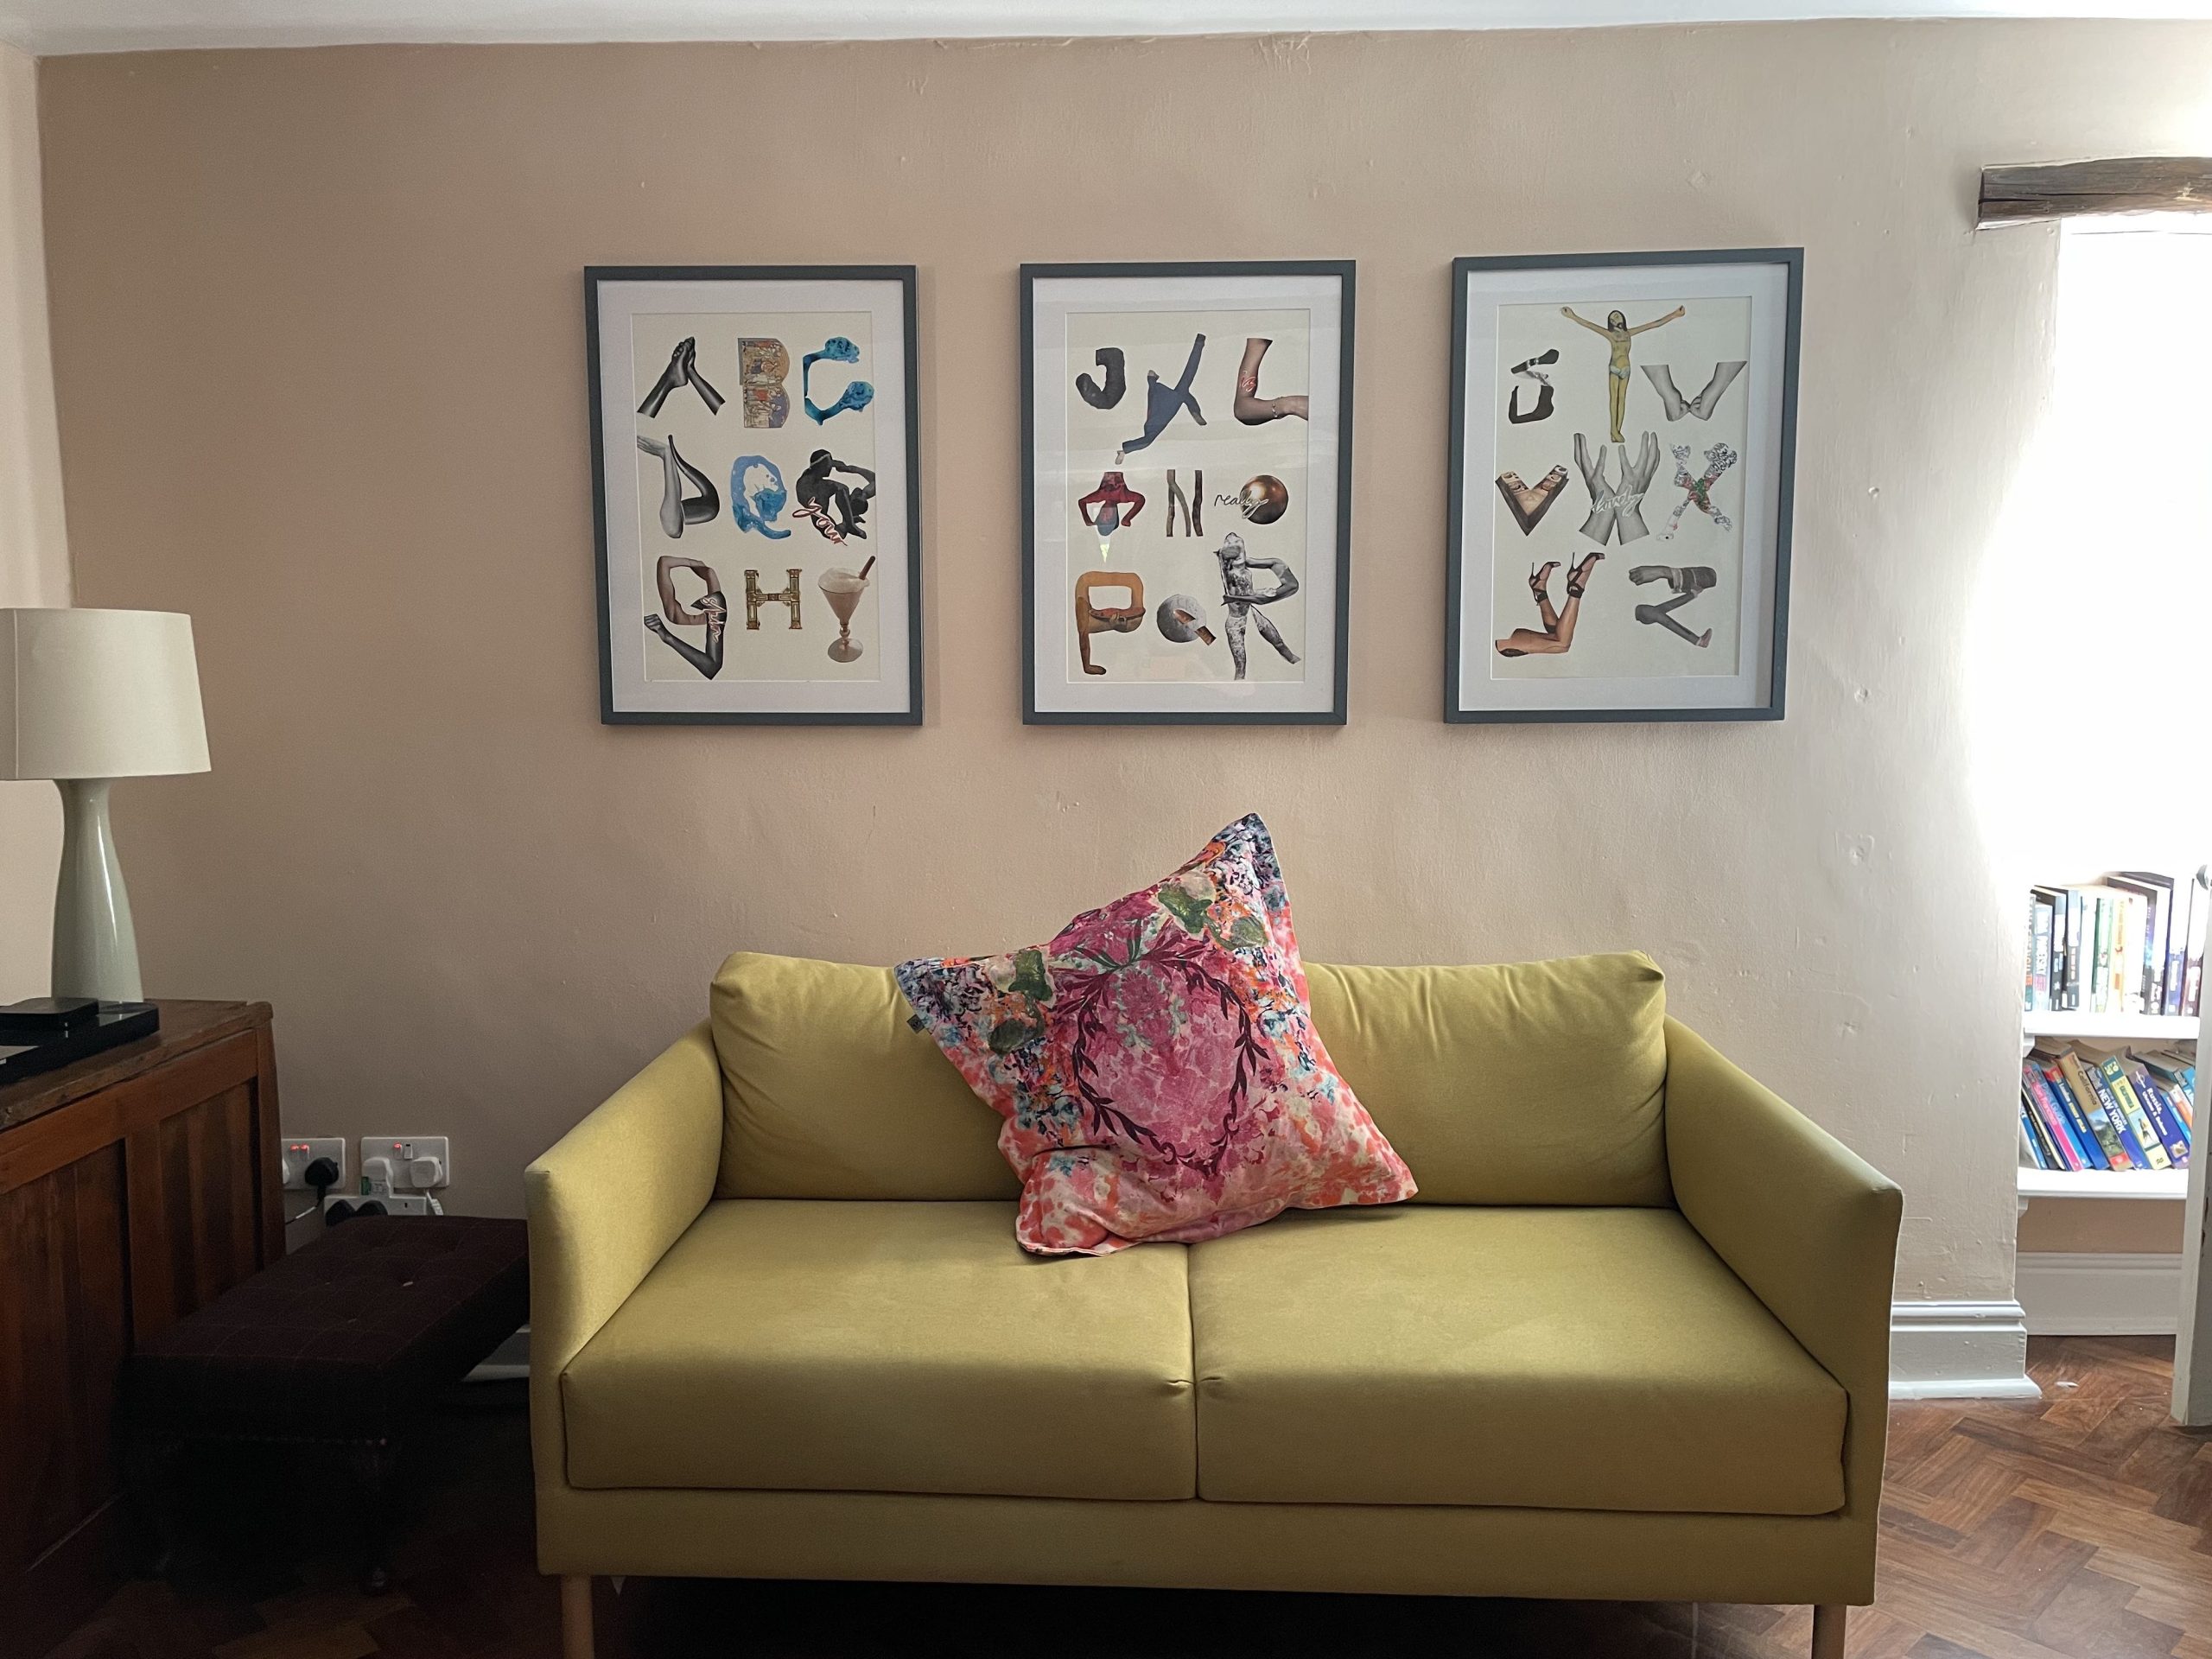 A yellow sofa with a pink cushion. On the wall behind it are framed pictures of collage letters.